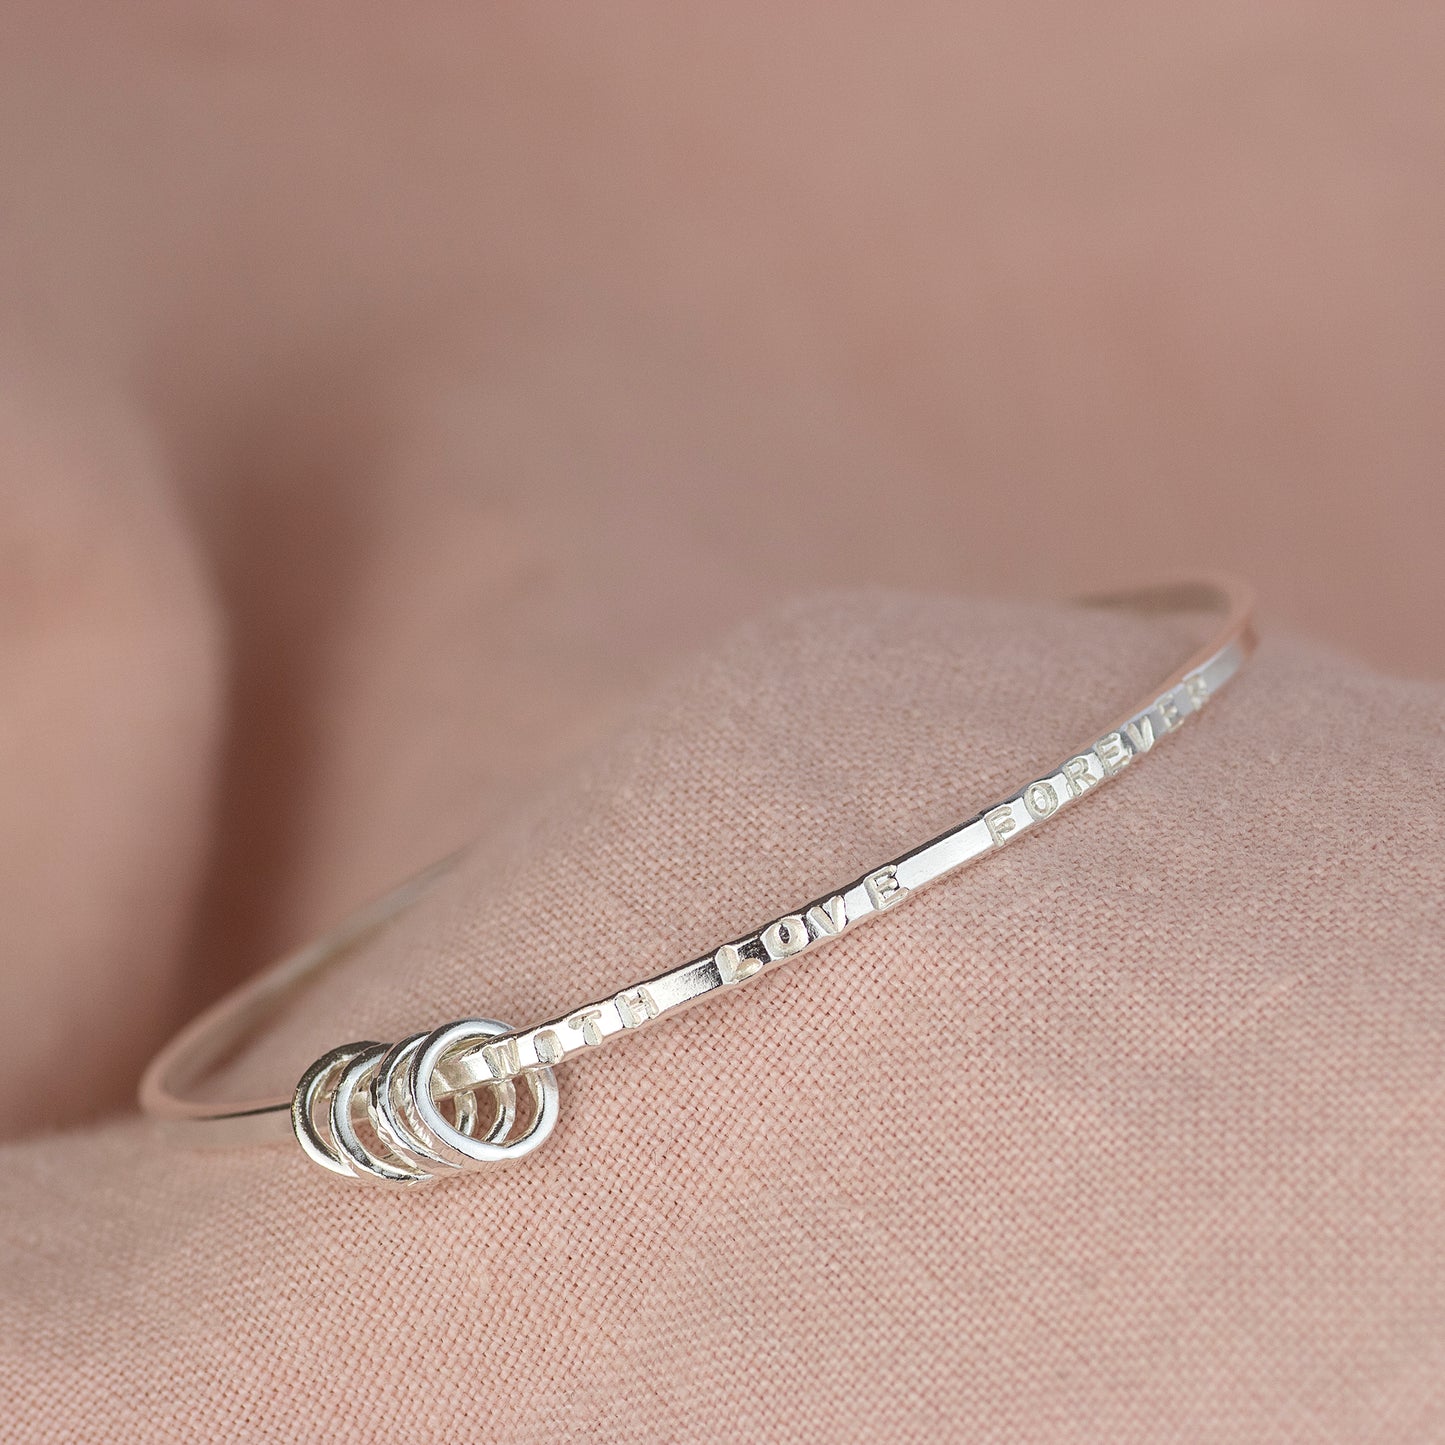 Personalised 40th Birthday Silver Bracelet - 4 Links for 4 Decades